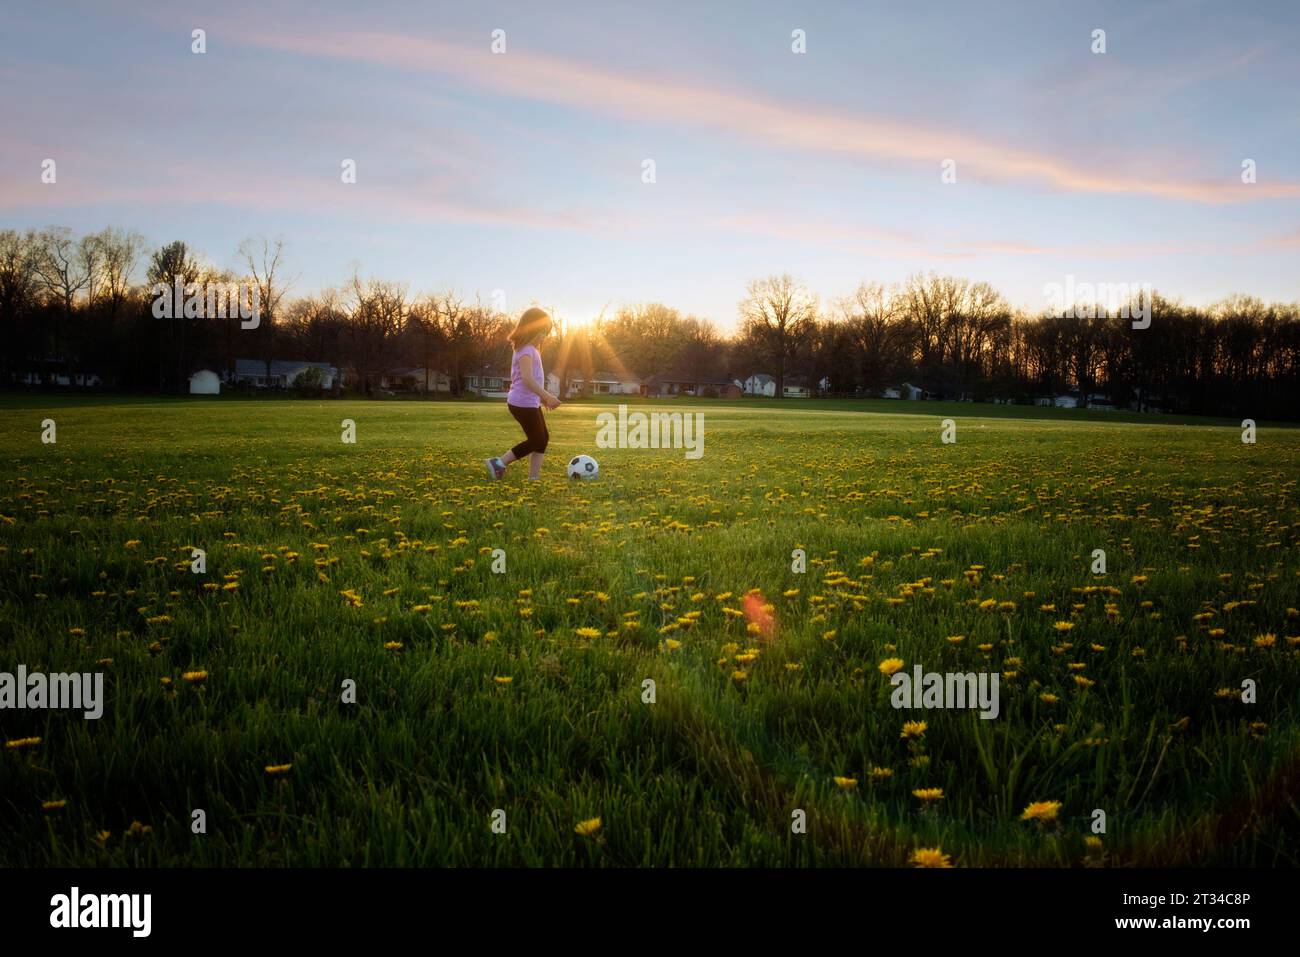 Young girl kicking soccer ball through field in spring Stock Photo